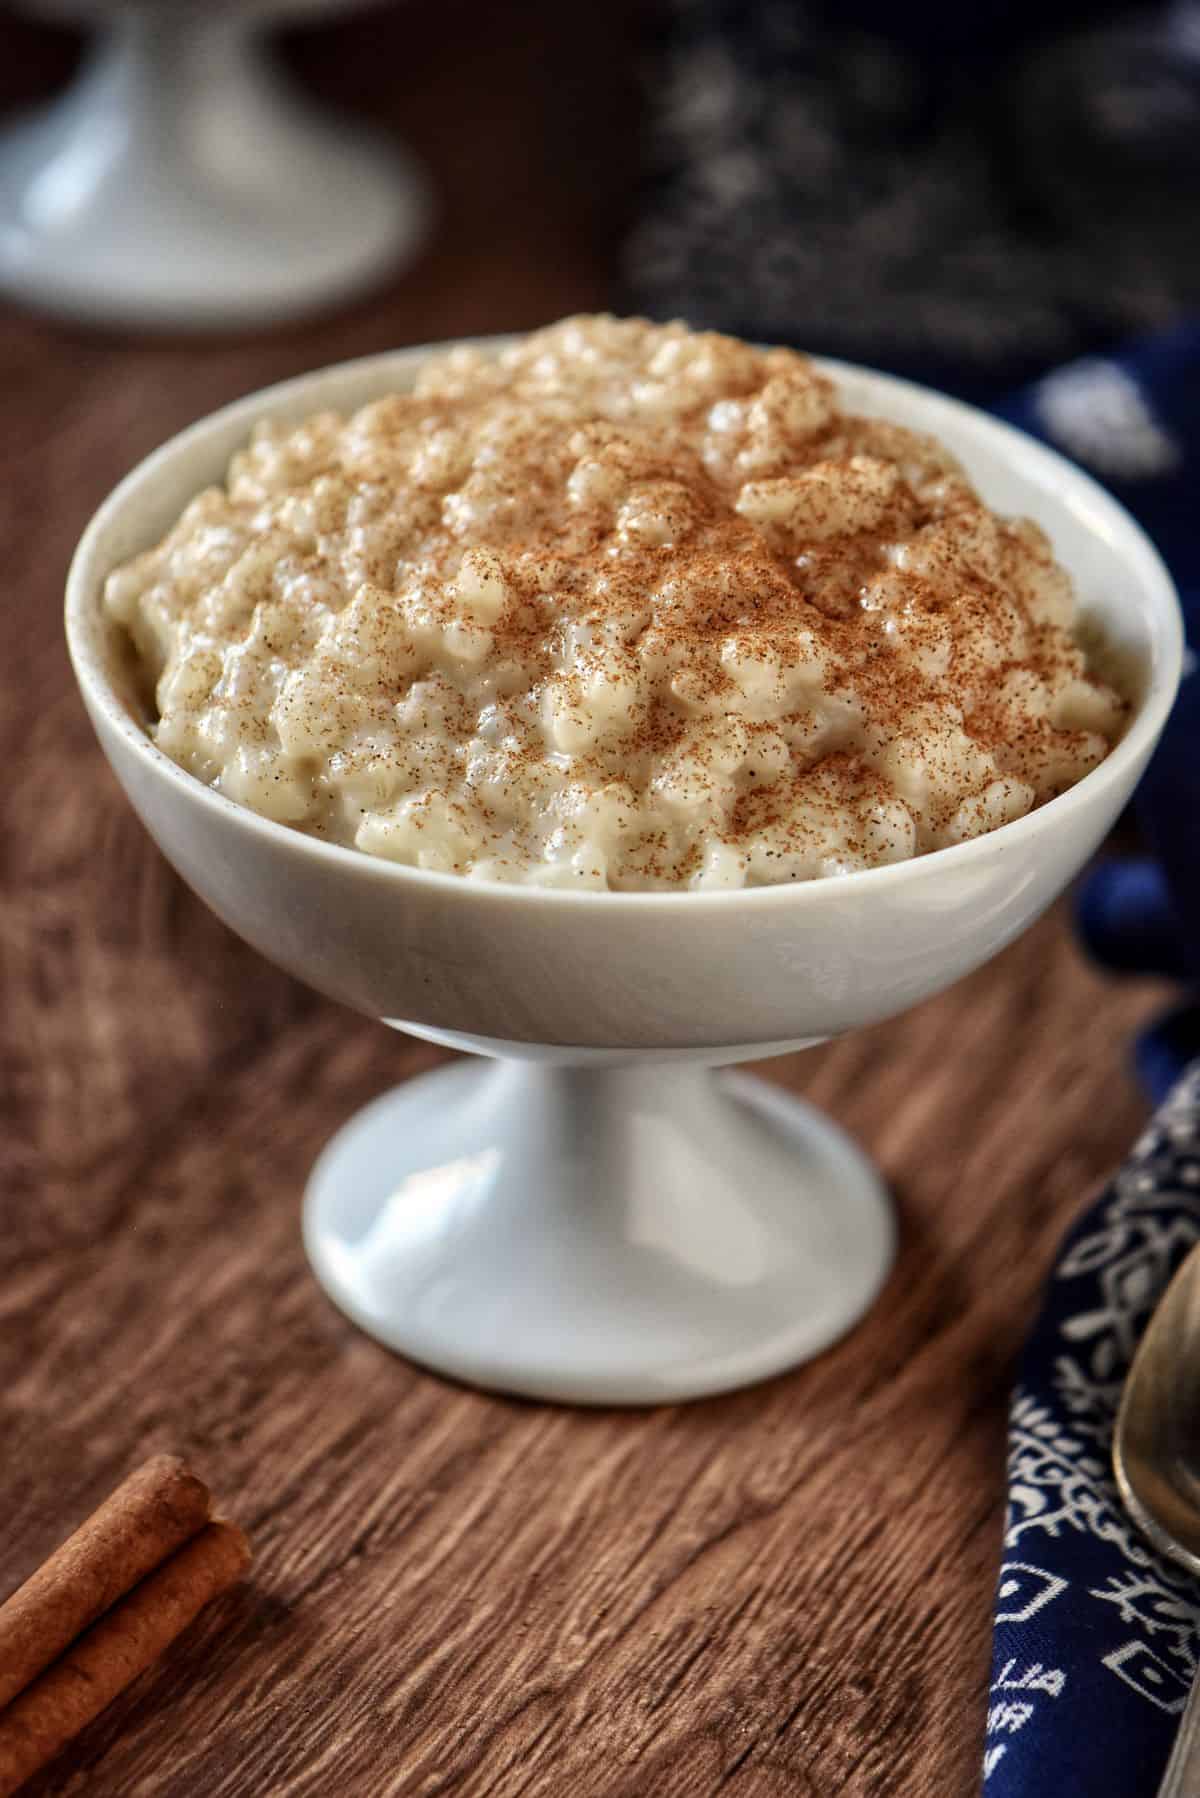 A dessert bowl with creamy rice pudding.